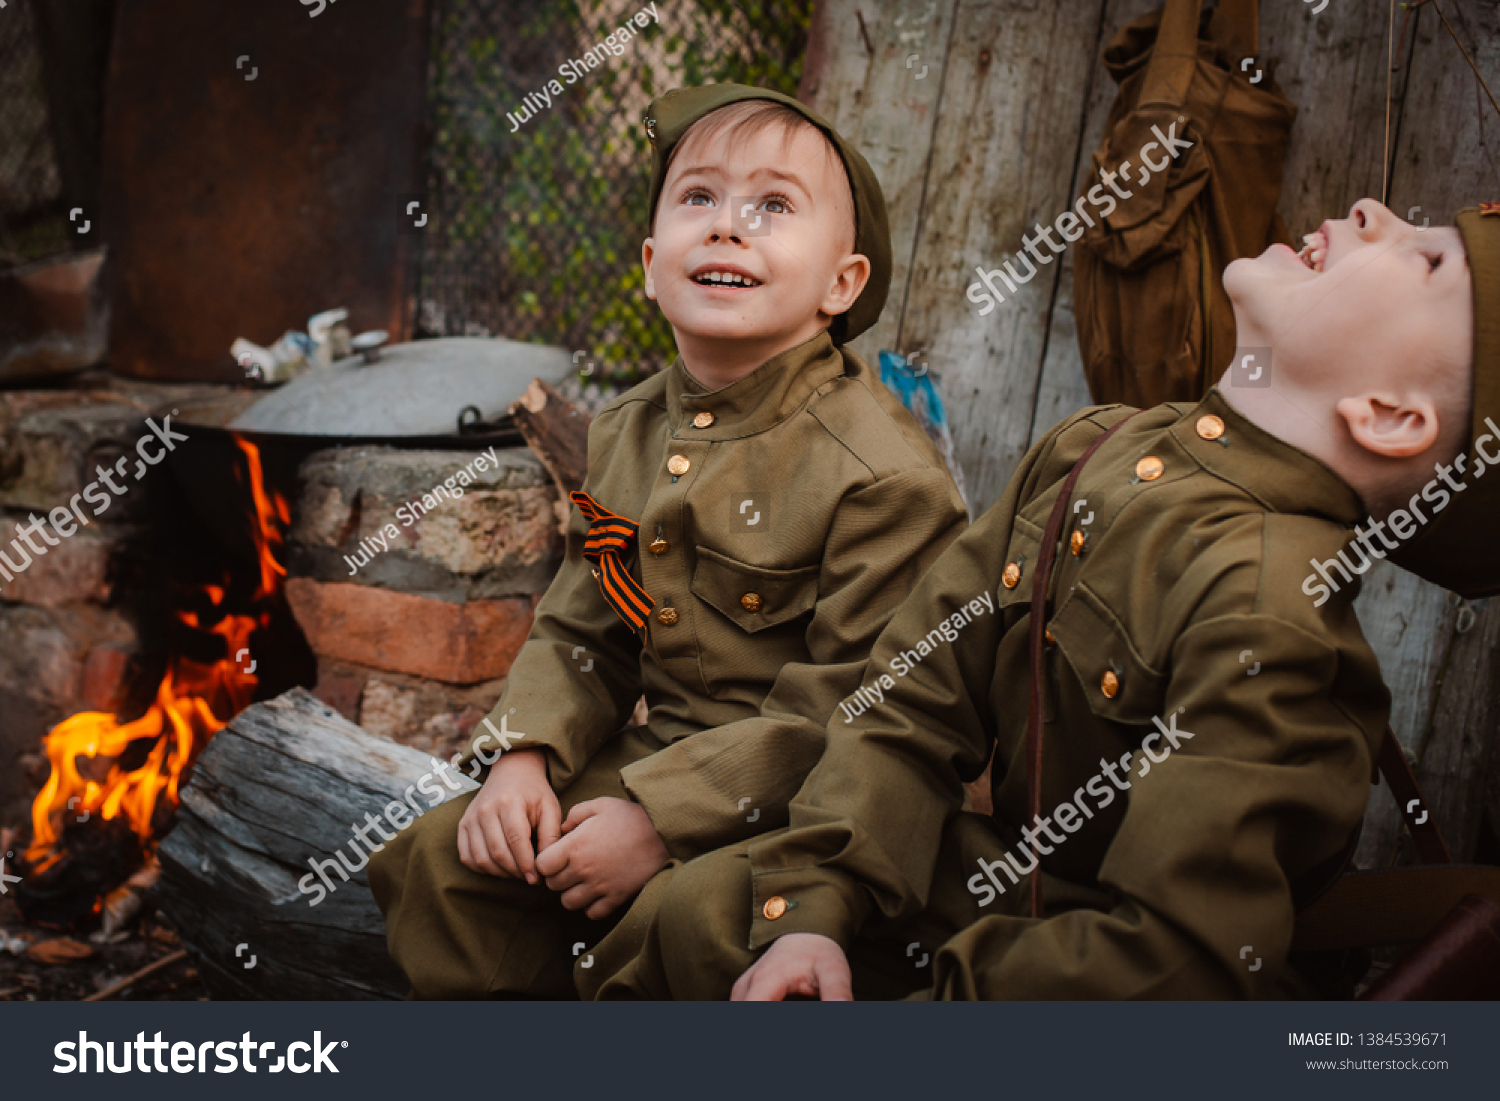 young child in military uniform on holiday day of victory, the scenery of wartime. Rustic style. Accordion, flag. May 9 2018, Russia, #1384539671